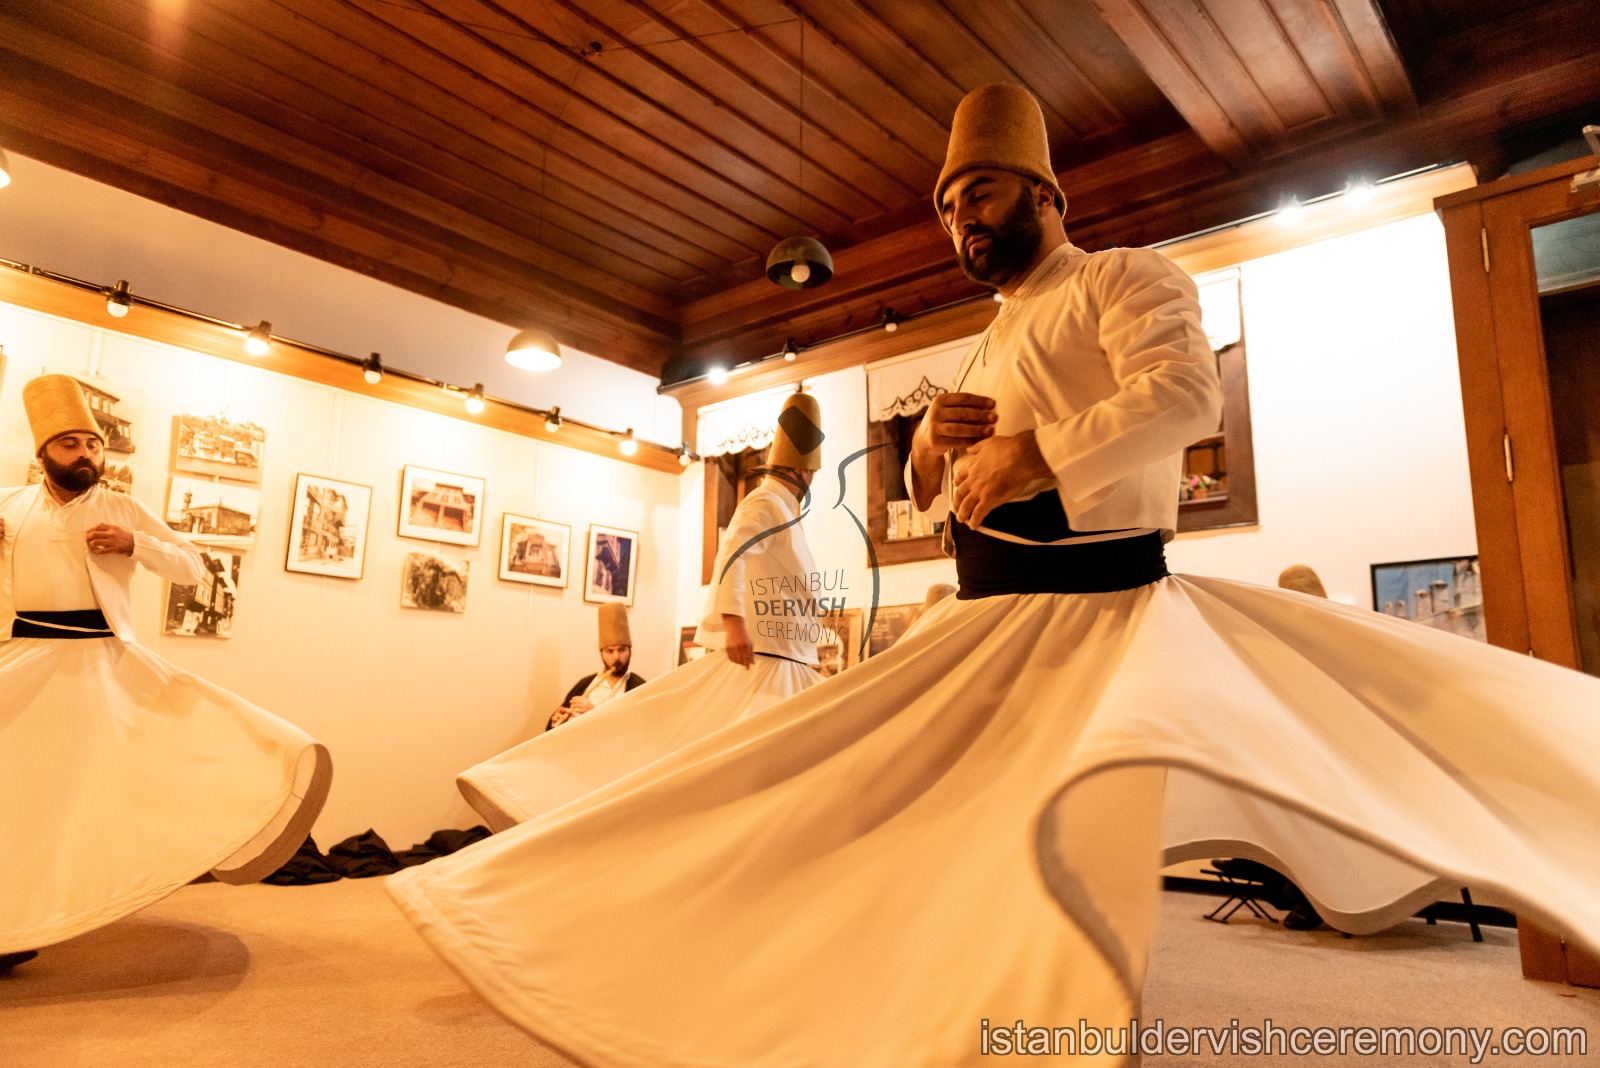 Whirling Dervishes Ceremony in a Real Sufi Monastery